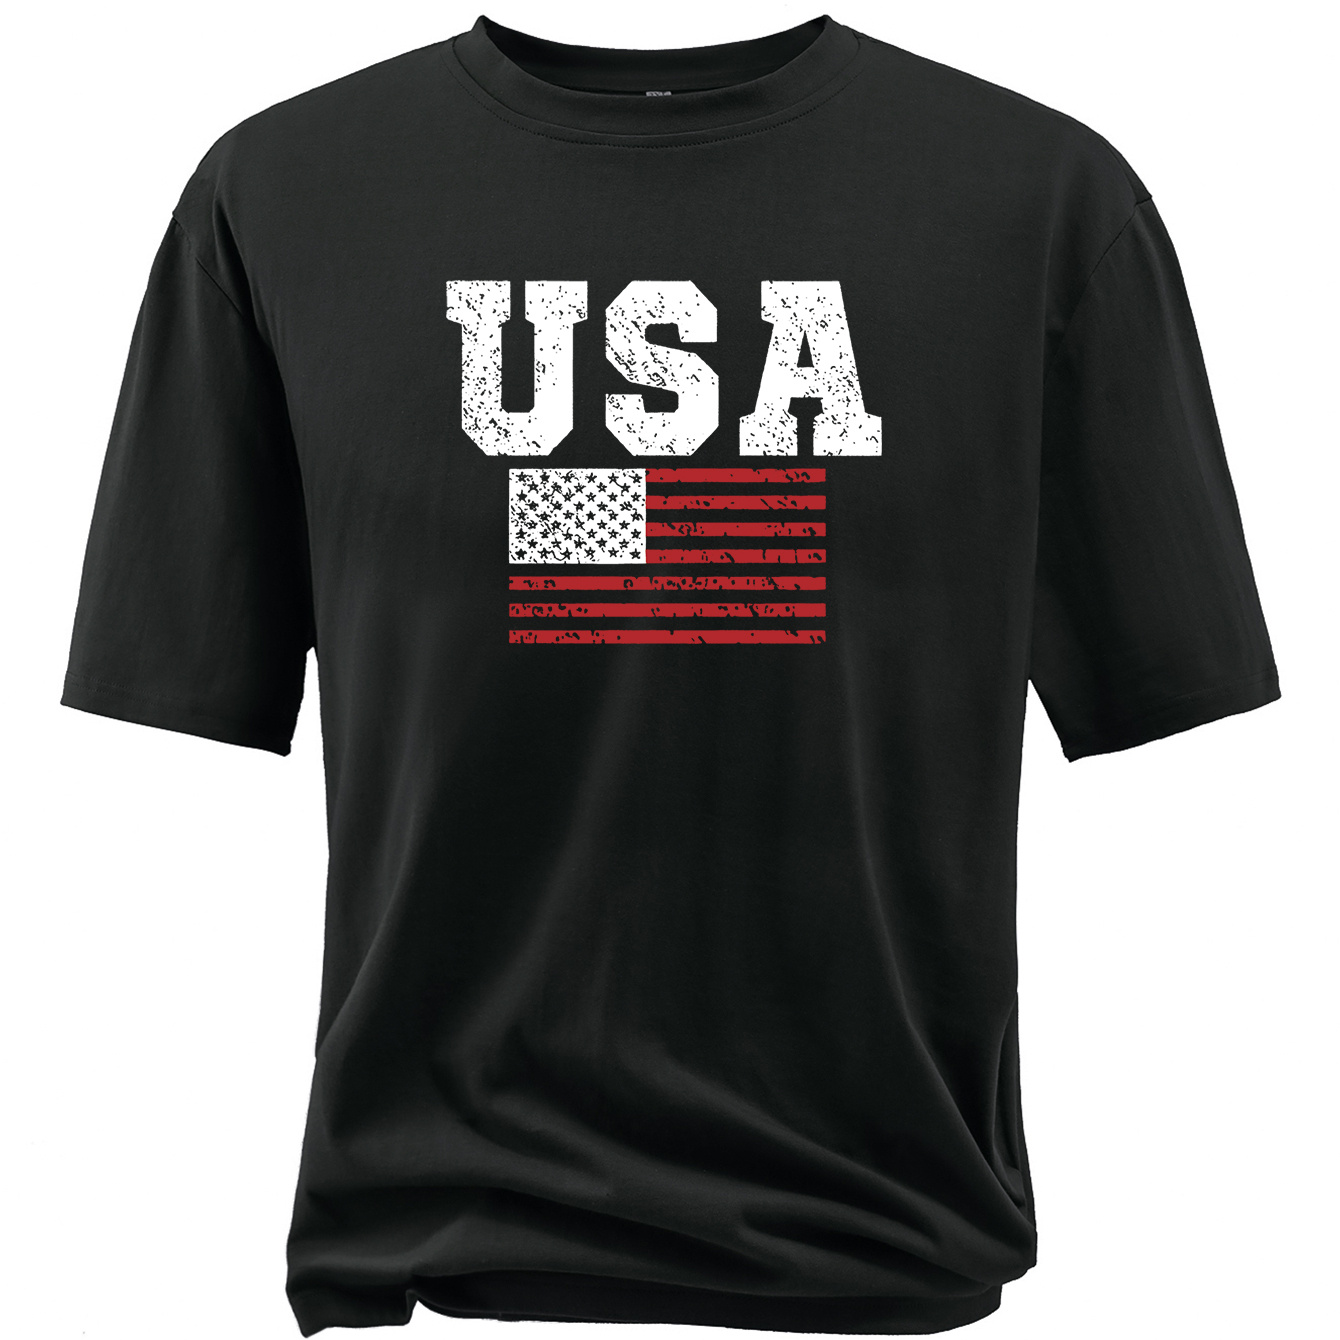 

Plus Size Men's Usa & Us National Flag Graphic Print Short Sleeve T-shirts, Comfy Casual Elastic Crew Neck Tops For Men's Outdoor Activities